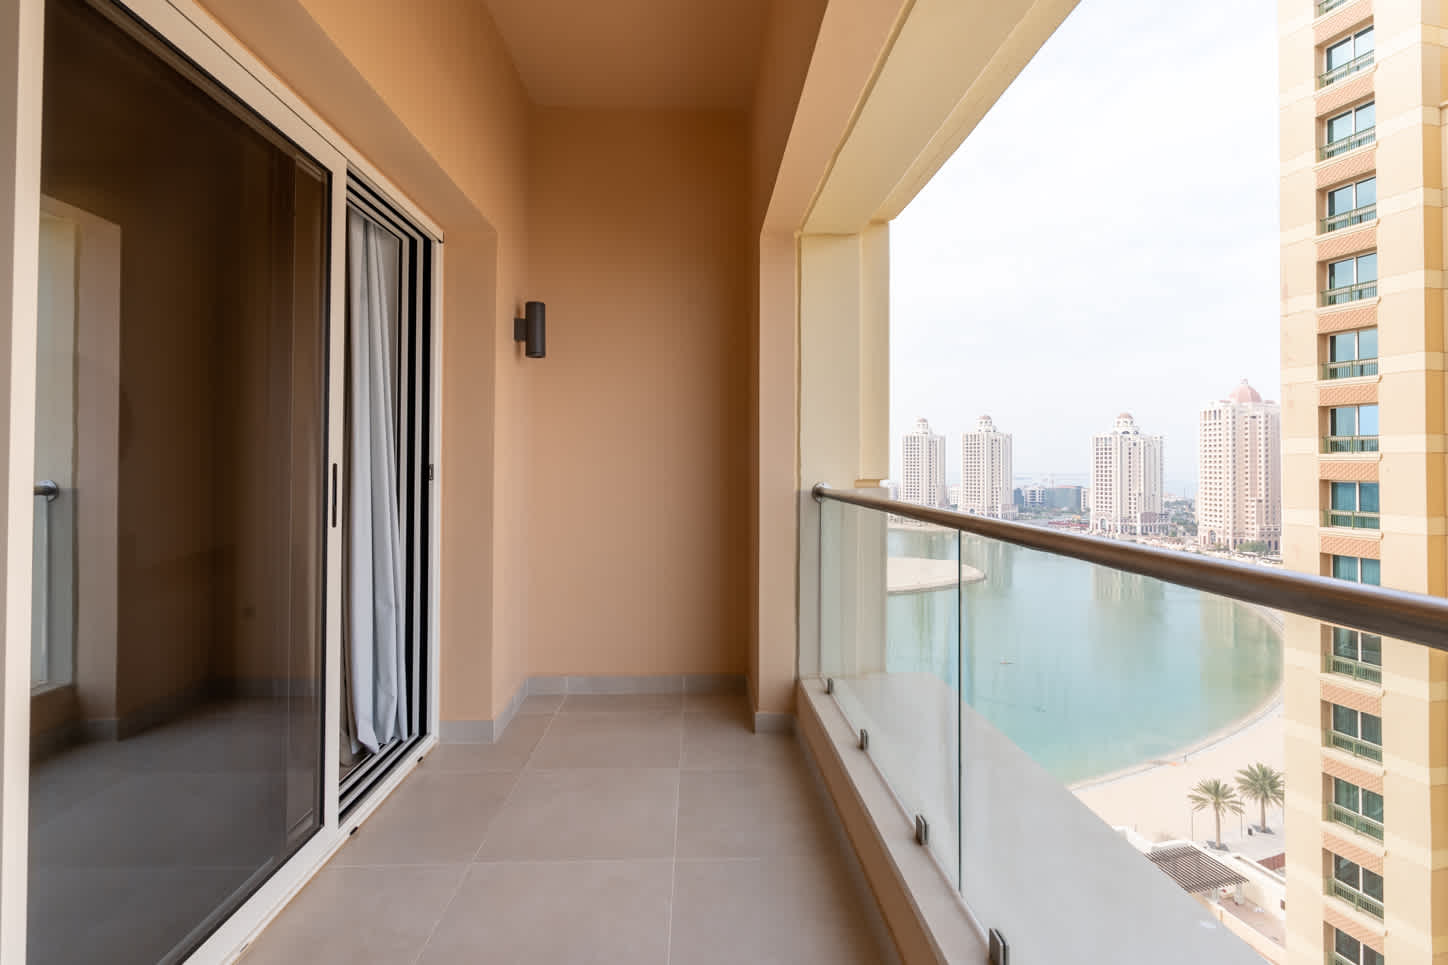 25 Spaces Real Estate - Viva Bahriya - Properties for Rent - 15th March 2023 ref WAPT258018 (10)